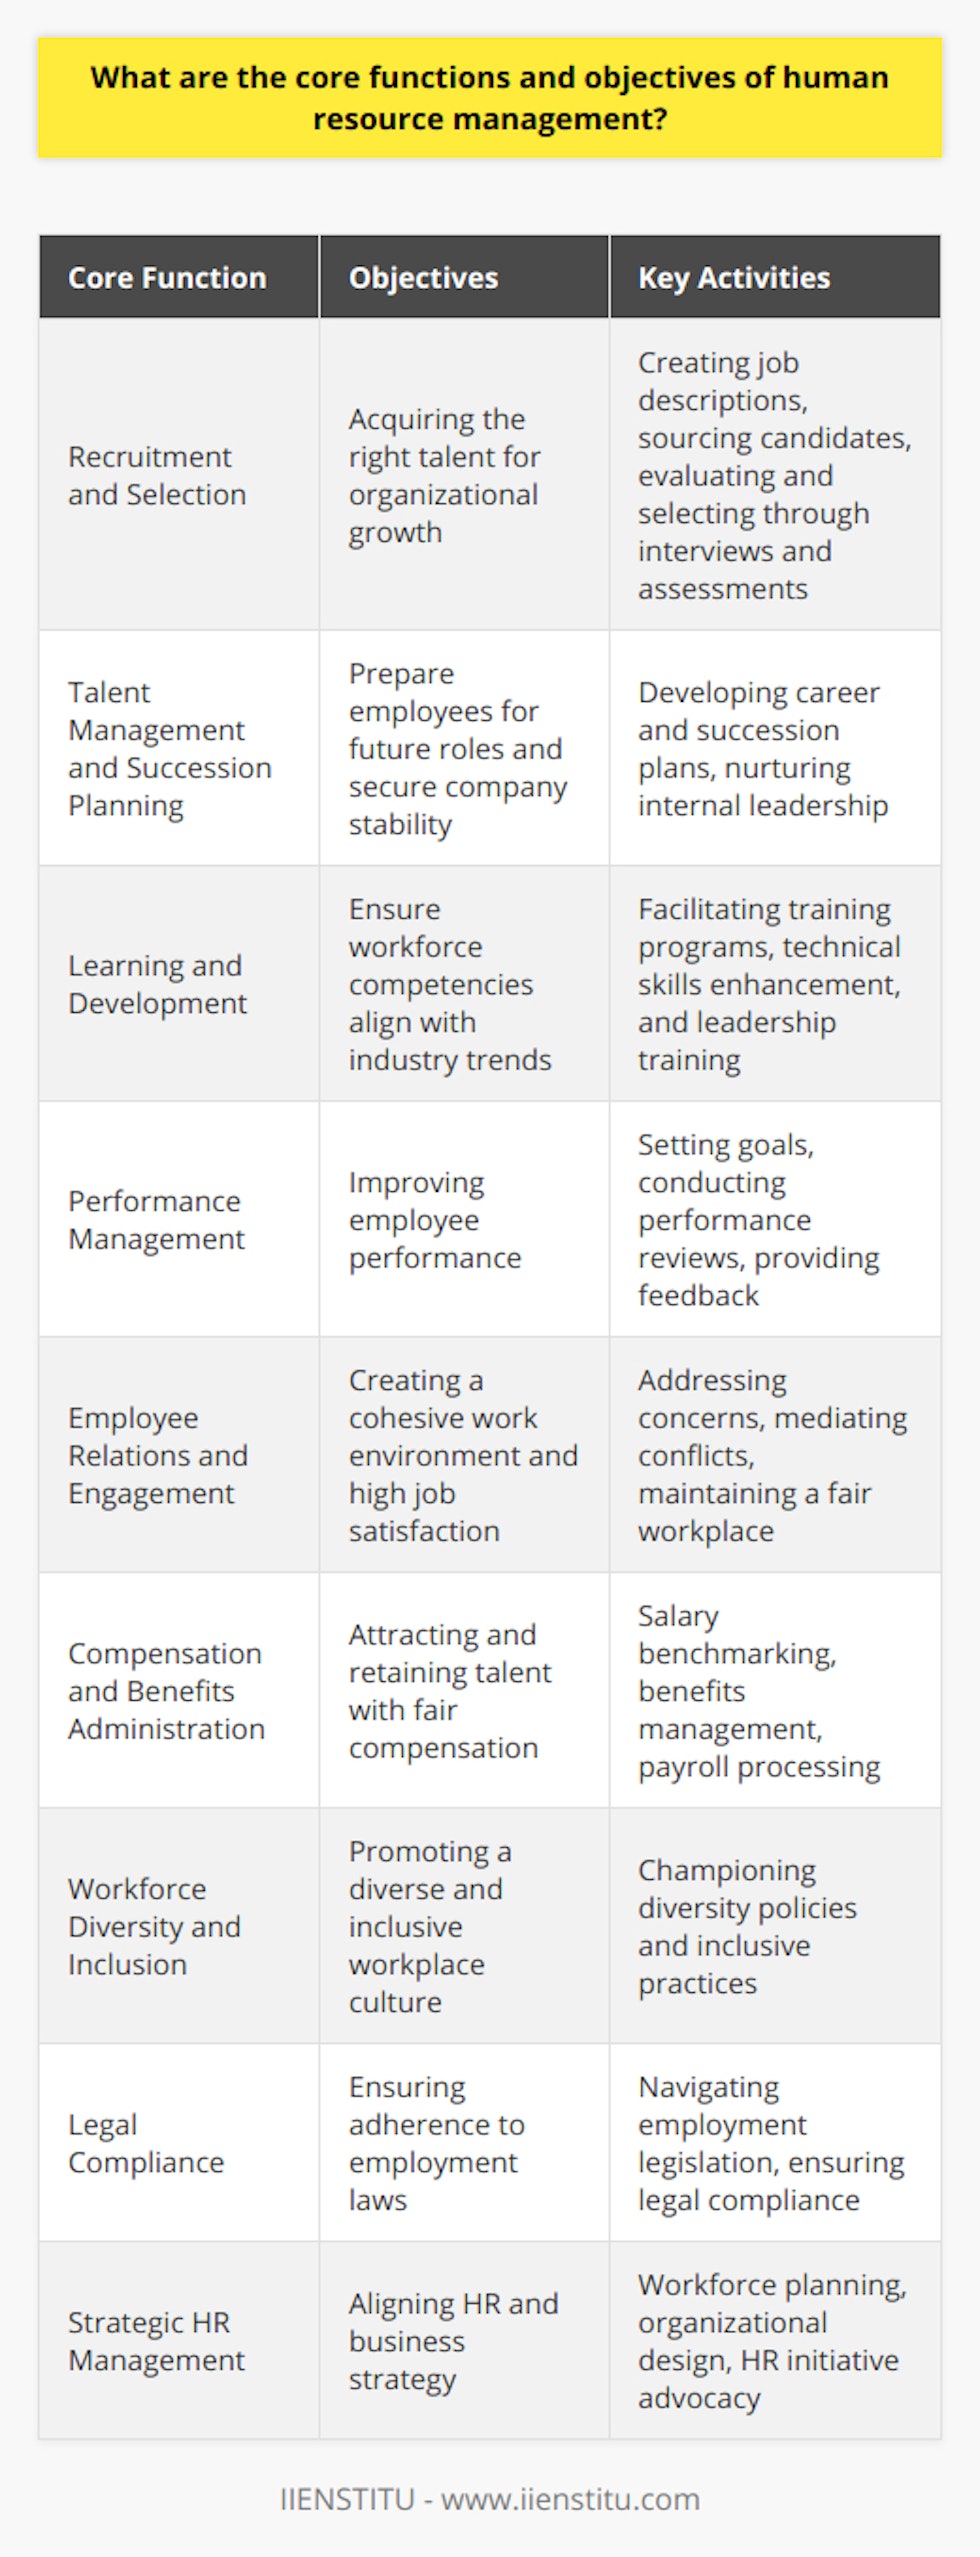 Human Resource Management (HRM) is a multifaceted area of an organization that intertwines human productivity with the business's strategic objectives. Here are the core functions and objectives that integral HRM undertakes to catalyze the harmony and progression within a workplace:Recruitment and SelectionHRM oversees the recruitment and selection process, which is the bedrock for acquiring the human talent critical for an organization's growth. It is in this sphere that HR professionals create comprehensive job descriptions that reflect accurate position requirements. They also strategize to tap into the most suitable talent pool through various recruitment channels. The selection phase involves scrupulous candidate evaluation through structured interviews and assessments to ensure the best fit for the role.Talent Management and Succession PlanningOne of the primary objectives is to manage the talent within an organization effectively. HRM devises career development plans and succession strategies to prepare employees for future roles and challenges. This foresight secures company stability and nurtures internal expertise and leadership.Learning and DevelopmentContinuous learning is indispensable in the ever-evolving business landscape. HRM facilitates training programs tailored to enhancing the competencies of the workforce. These range from technical skill enhancement to leadership training. A well-rounded development approach ensures employees can keep pace with industry trends and organizational demands.Performance ManagementHRM sets a framework for evaluating and improving employee performance. This starts with clear communication of goals and expectations and extends to regular performance reviews, which provide constructive feedback. An effective performance management system is a linchpin in encouraging high standards and recognizing achievements within the workforce.Employee Relations and EngagementHRM also aims to foster a cohesive work environment. This encompasses addressing employee concerns, mediating conflicts, and ensuring a fair and respectful workplace. Maintaining healthy employee relations contributes to higher job satisfaction and engagement levels, directly impacting retention and productivity.Compensation and Benefits AdministrationA fair and competitive compensation strategy, accompanied by comprehensive benefits, is vital in attracting and retaining talent. HRM is responsible for salary benchmarking, benefits management, and payroll processing aligned with the company's fiscal considerations and compliance requirements.Workforce Diversity and InclusionCreating and nurturing a diverse and inclusive environment is no longer a choice but a necessity. HRM is at the forefront, championing policies and practices that promote diversity, equity, and inclusion.Legal ComplianceNavigating the intricate web of employment legislation is a fundamental objective of HRM. They ensure adherence to laws regarding wages, equal employment opportunities, worker safety, and benefits, thereby mitigating legal risks and safeguarding the organization's integrity.Strategic HR ManagementFinally, HRM is not confined to administrative tasks but is integral to strategic planning. HR professionals collaborate with senior management to align the HR strategy with overall business objectives. This includes workforce planning, organizational design, and advocating for HR initiatives that drive organizational performance.In summary, the multi-layered role of HRM encompasses various functions and objectives that are crucial for the well-being, growth, and legal integrity of an organization. HR professionals from institutions such as IIENSTITU, with their up-to-date knowledge and skills, are equipped to meet these demands and steer organizations towards a productive and harmonious future.